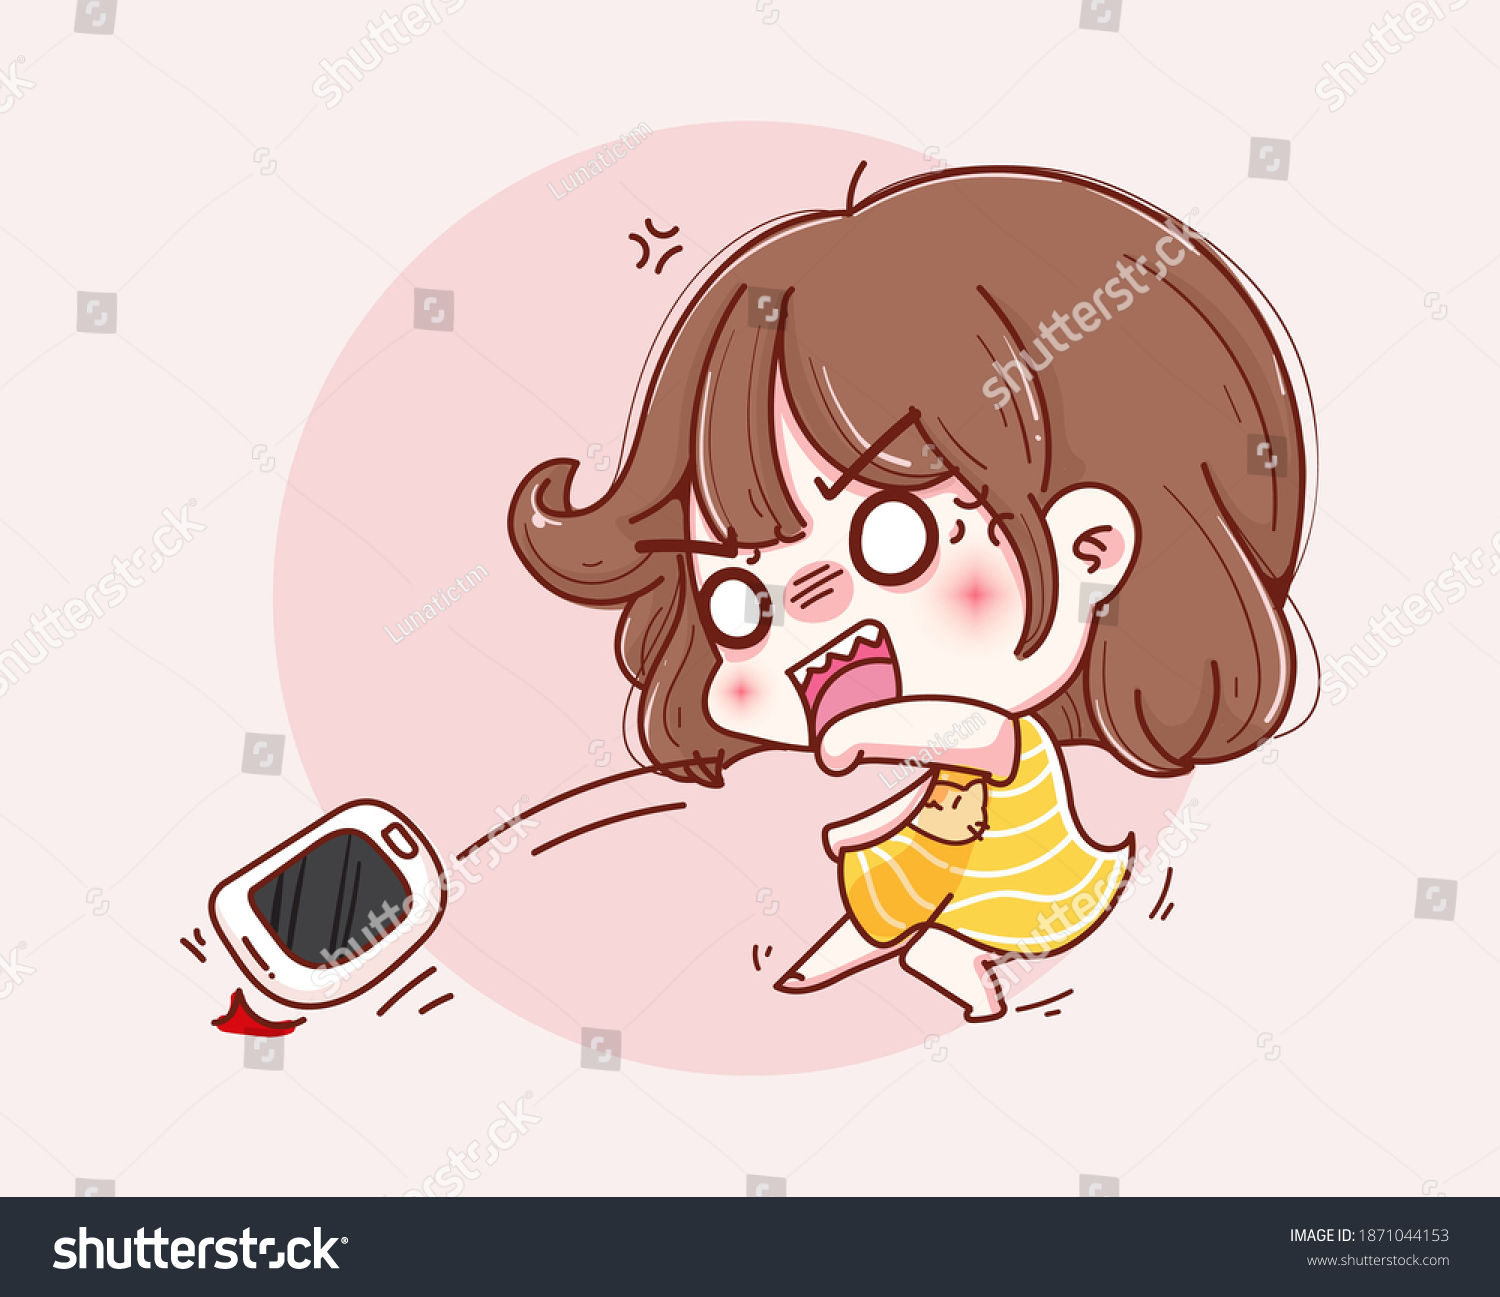 Angry Girl Throwing Phone Vector Character Stock Vector Royalty Free 1871044153 Shutterstock 